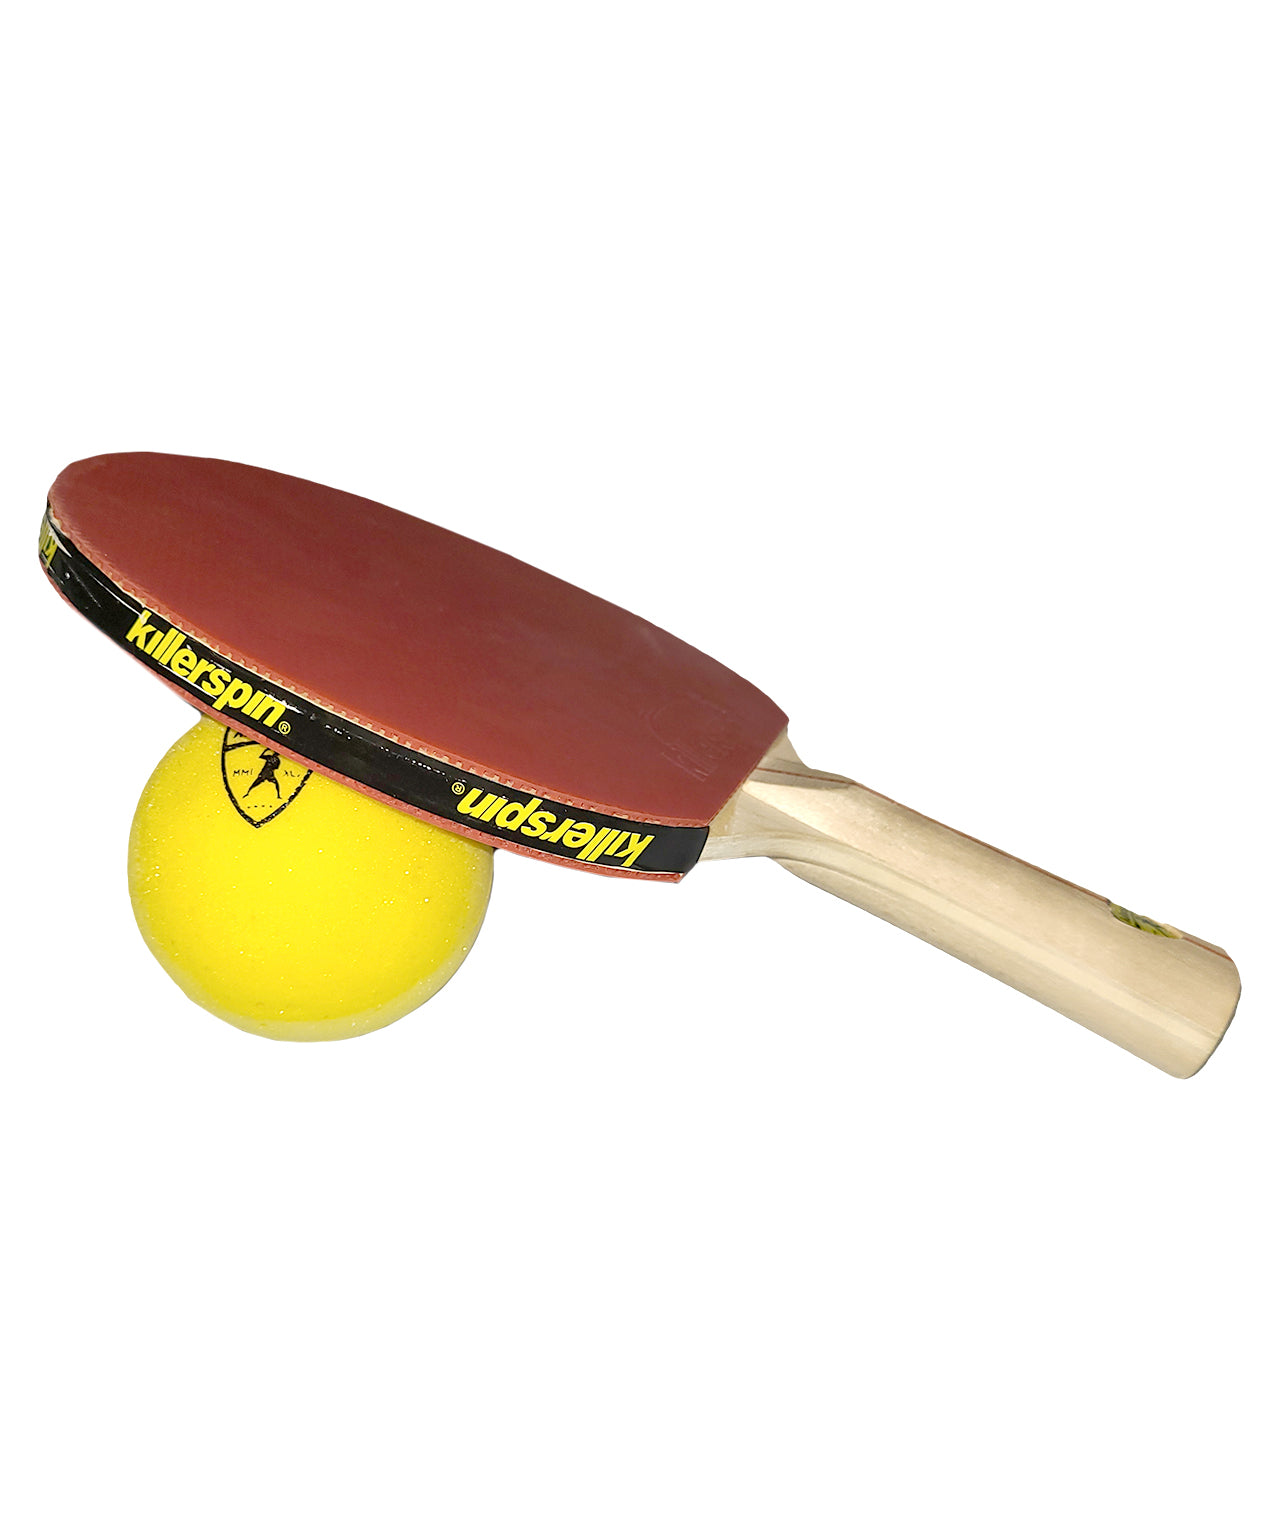 Killerspin No Noise Table Tennis Rubber Balls - Paddle and ball